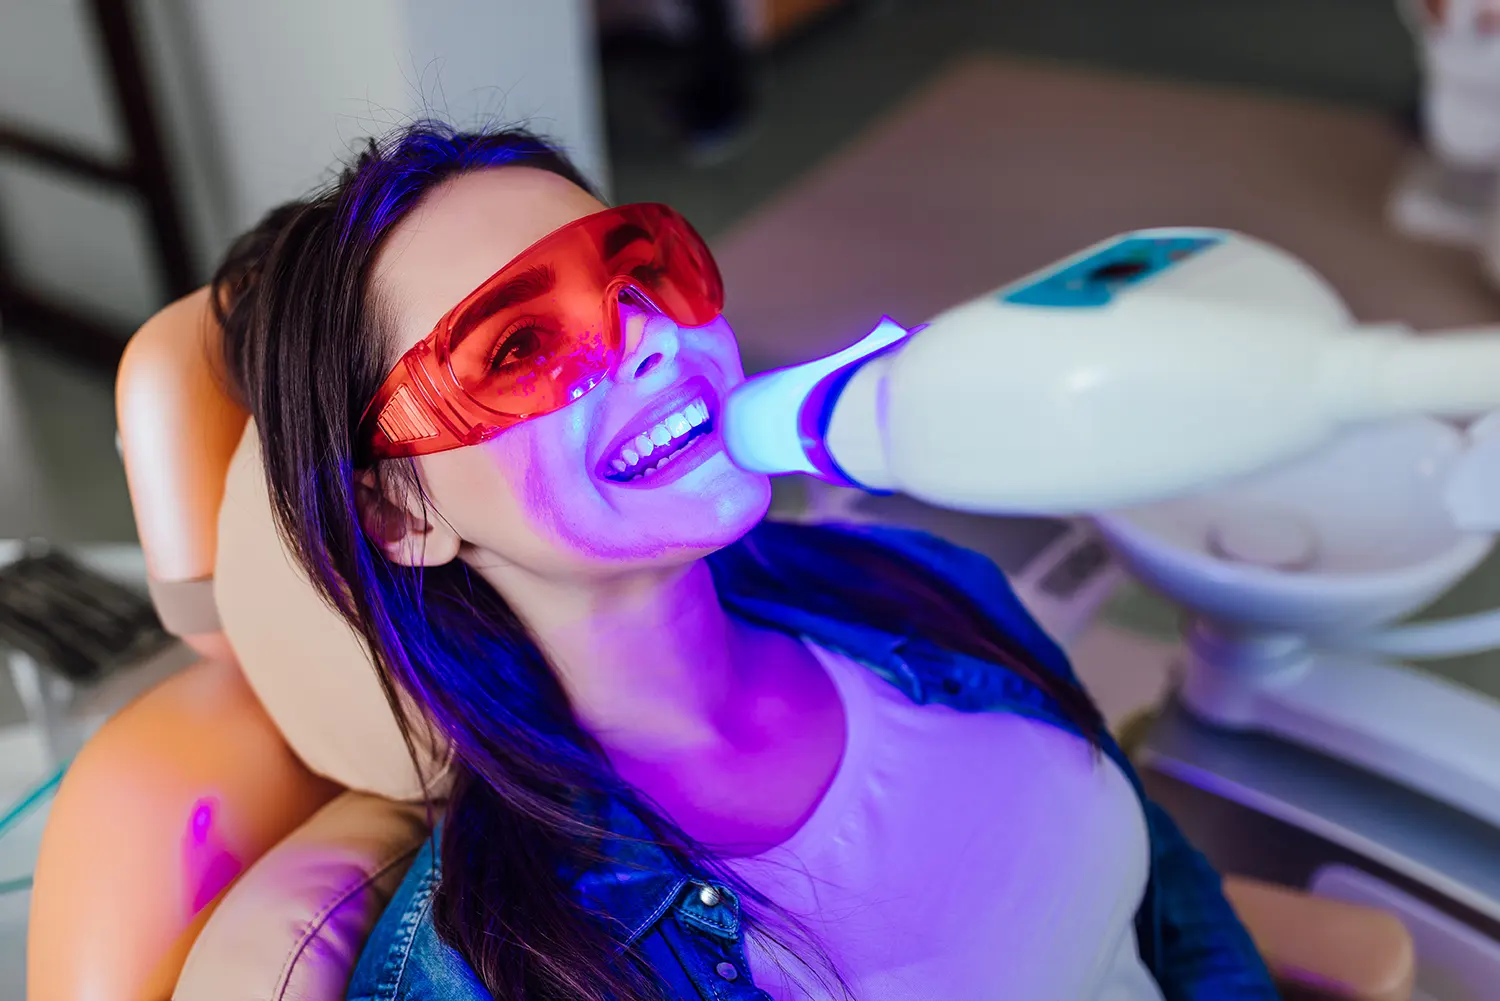 How long does teeth sensitivity last after whitening?